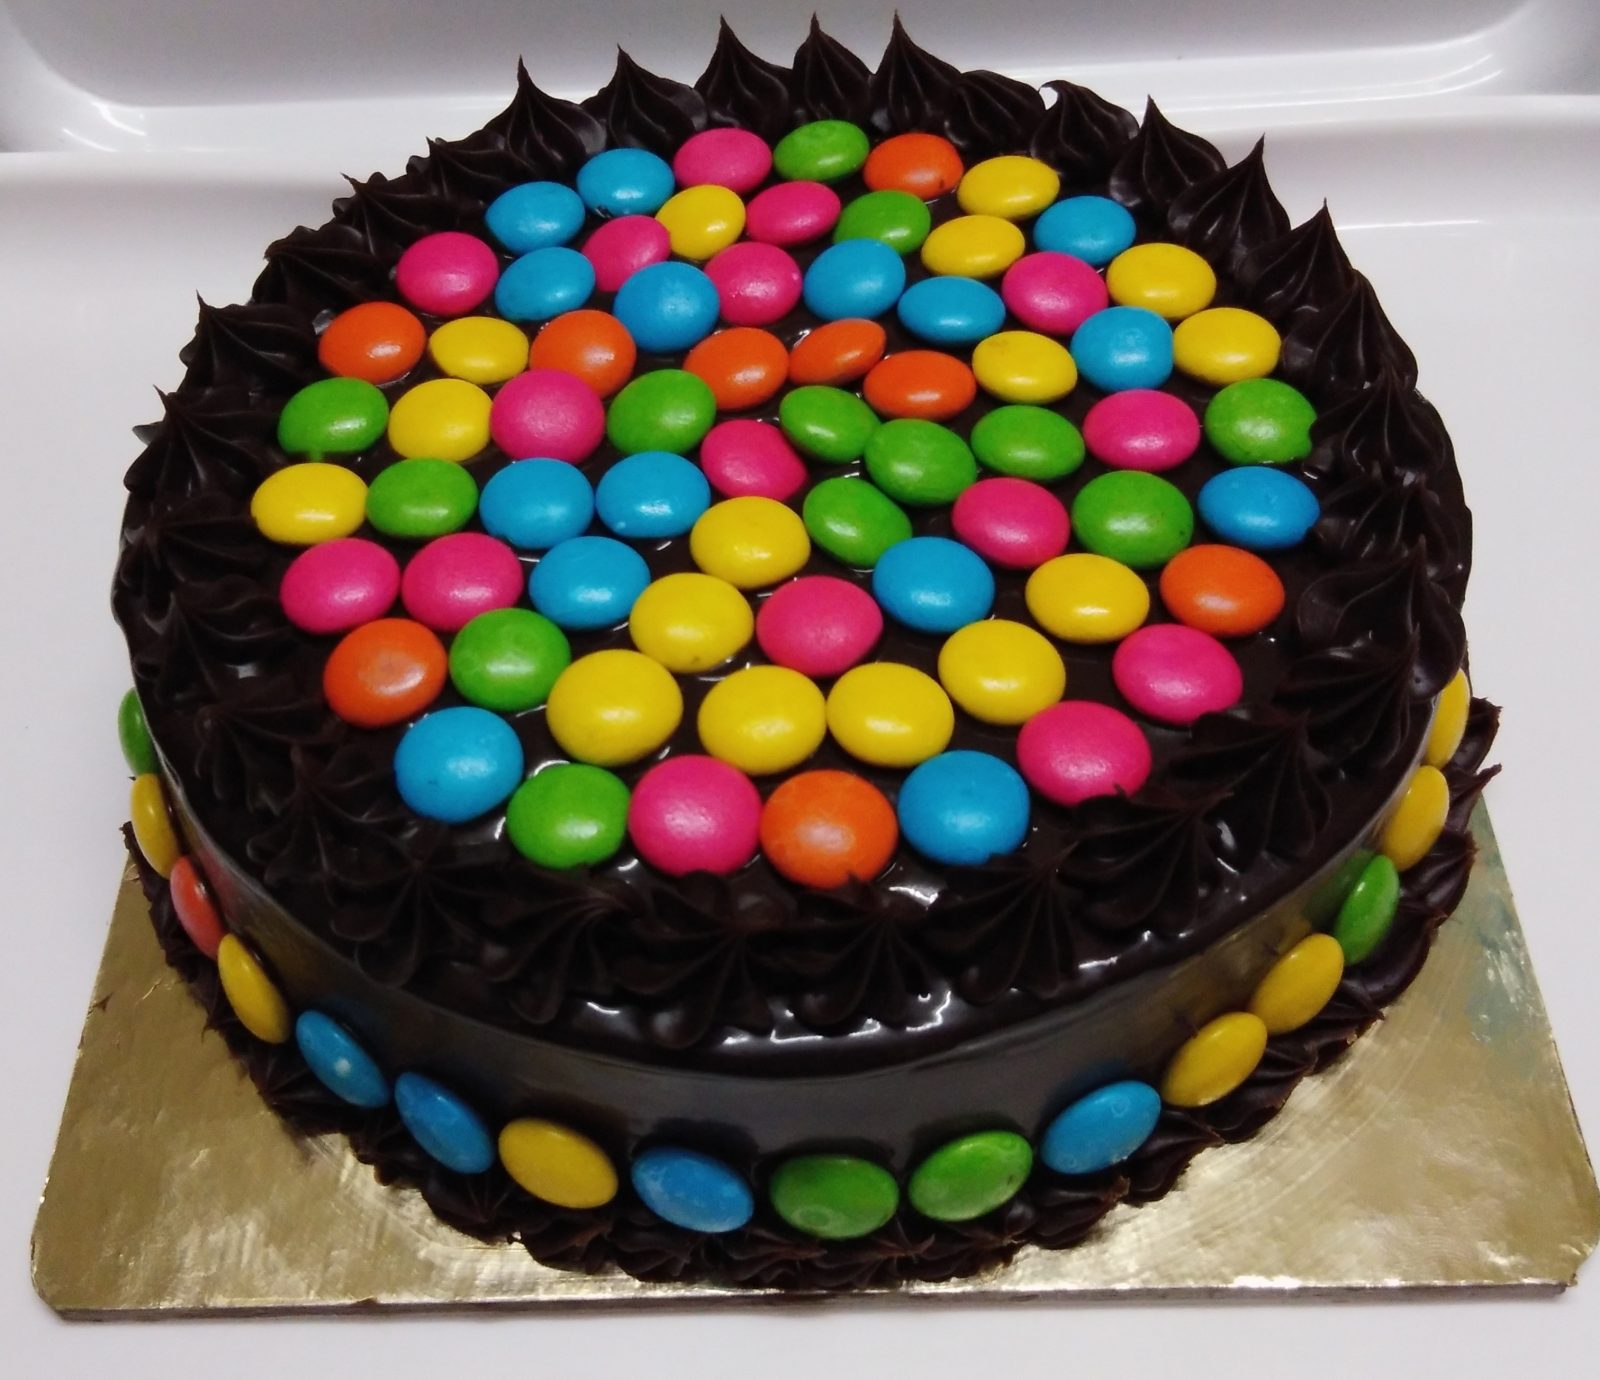 Gems And Coins Cake| Online Bakery Surat | Cake Shop Surat and Baroda |  Order Cake Online | Online Delivery in Surat and Baroda | Florist Surat |  Order Cakes in Surat